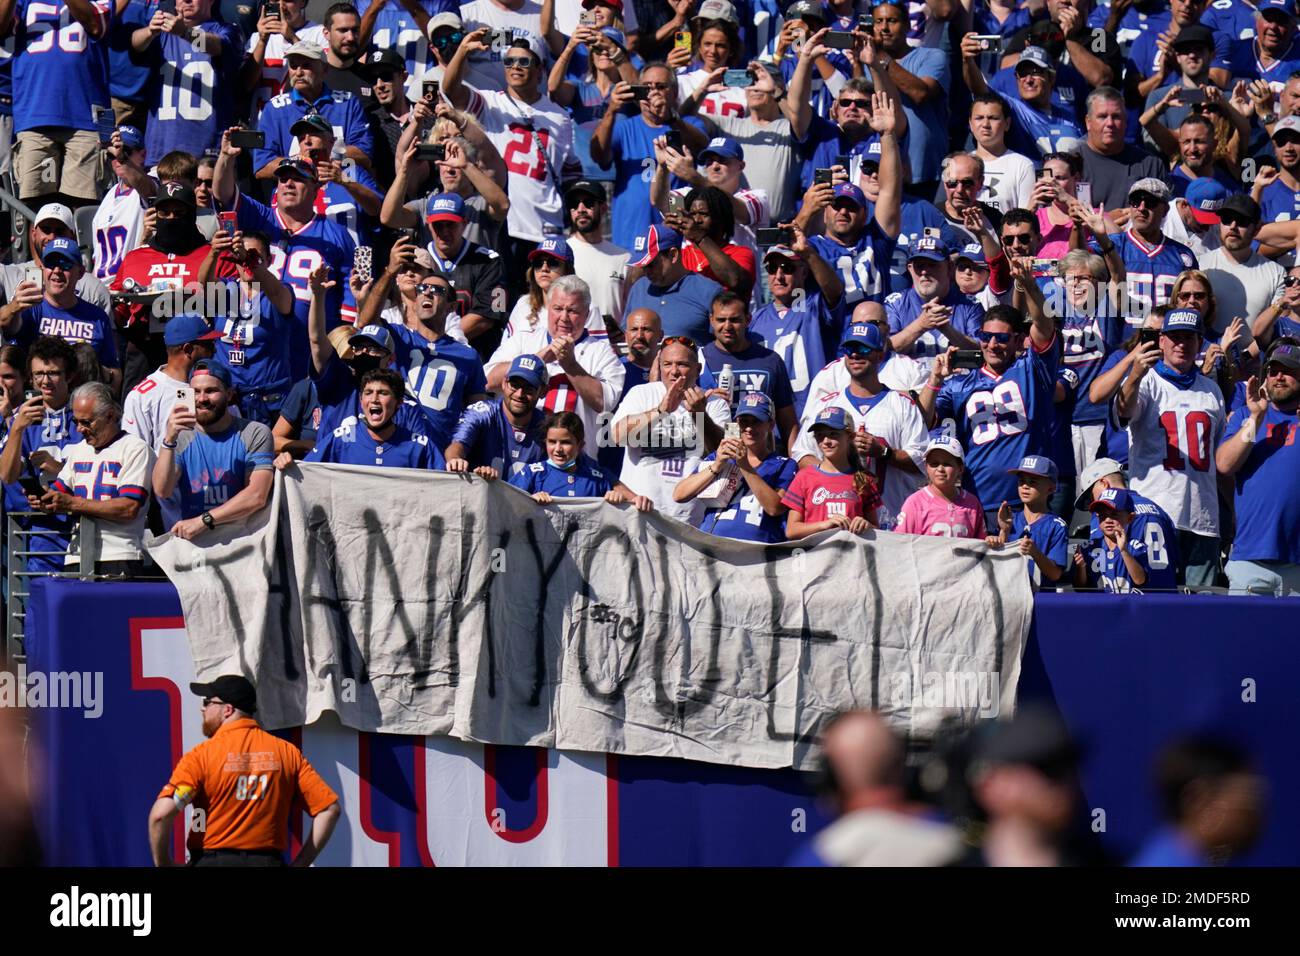 Fans honor former New York Giants quarterback Eli Manning as he addresses  the crowd during a ceremony to retire his jersey number 10 and celebrate  his tenure with the team during half-time